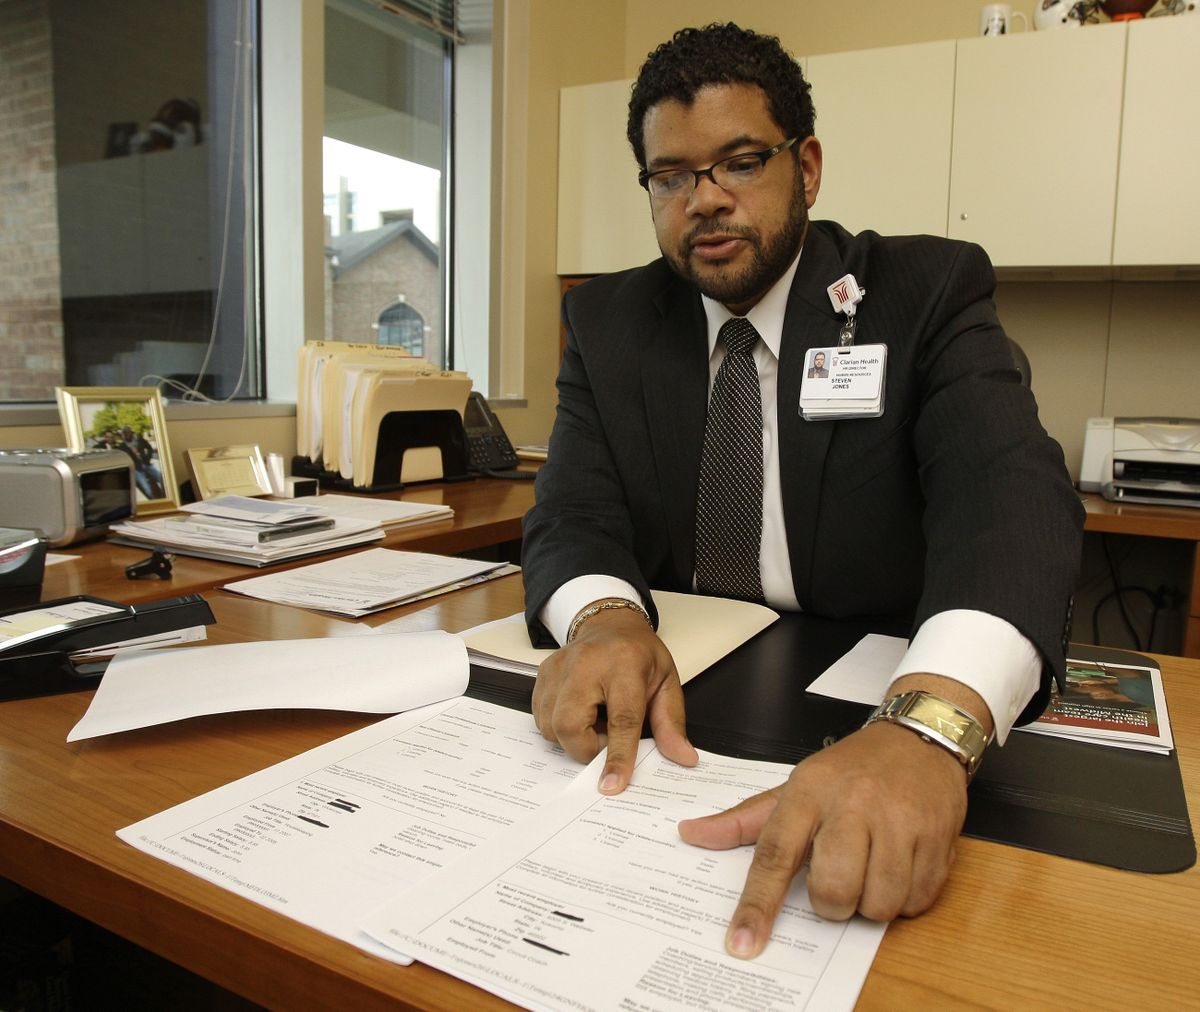 Recruiter Steve Jones reads through an application in his office at Clarian Health’s Methodist Hospital in Indianapolis on Sept. 28. Jones is trying to fill 228 open “critical” jobs at Clarian, including nurses, pharmacists, MRI technicians and ultrasound technologists.  (Associated Press / The Spokesman-Review)